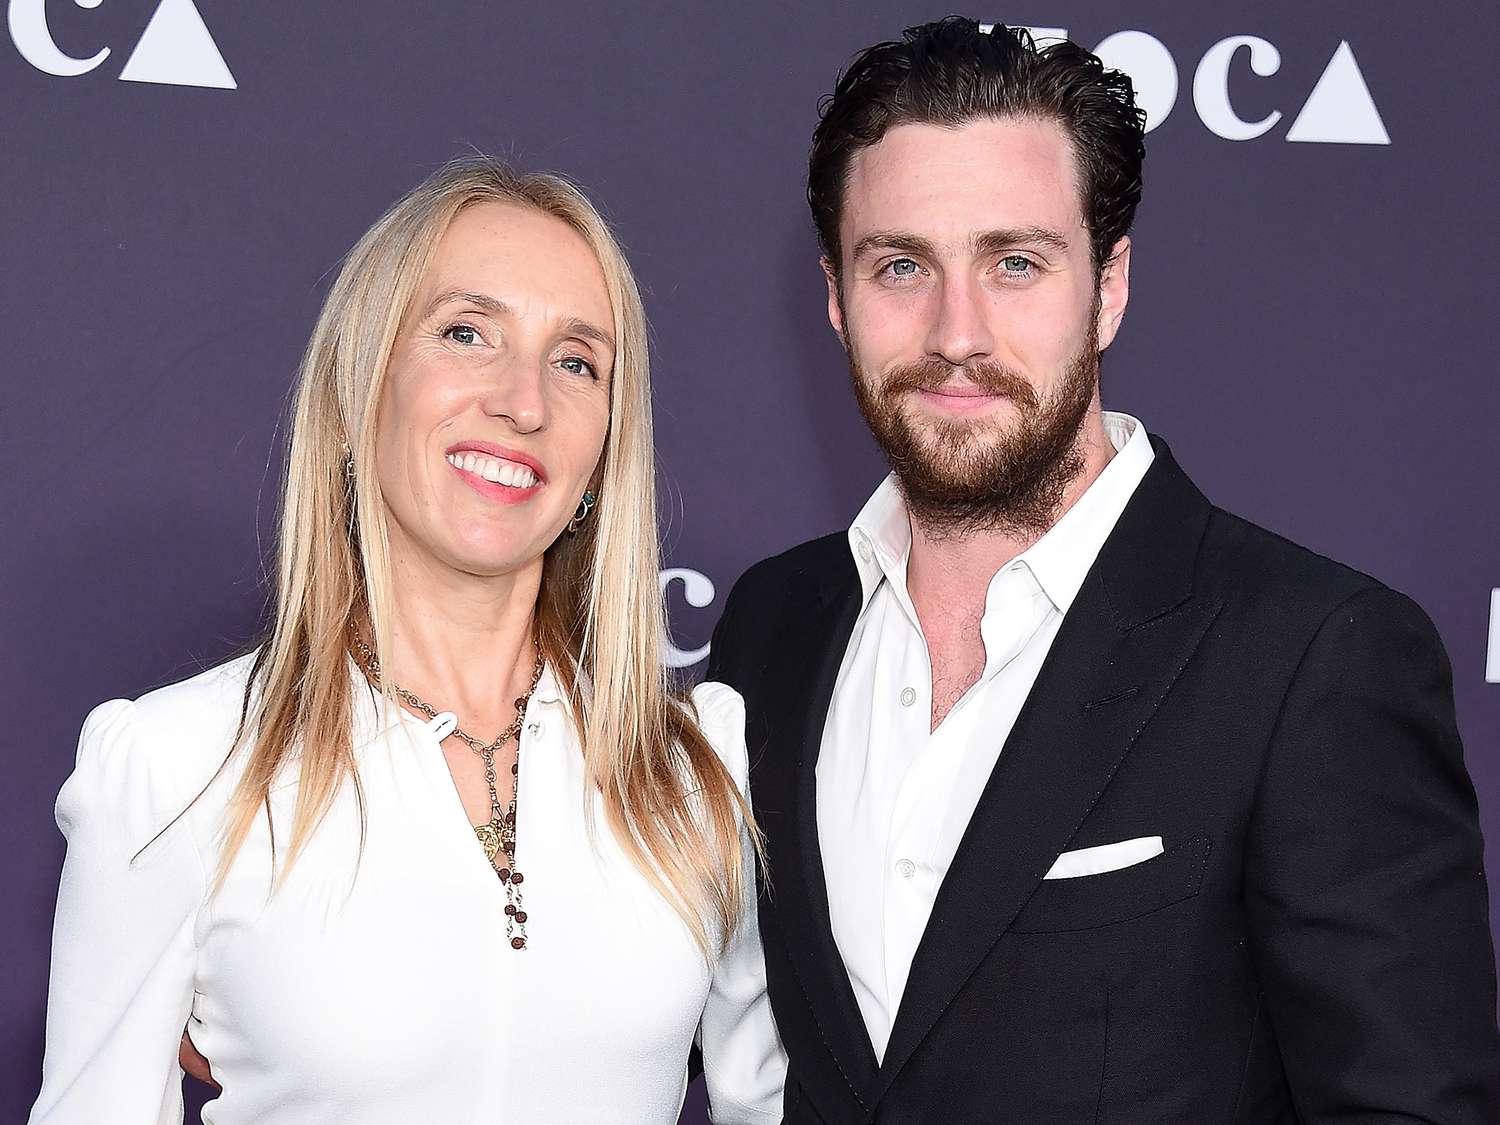 Sam Taylor-Johnson and Aaron Taylor-Johnson attend the MOCA Benefit 2019 at The Geffen Contemporary at MOCA on May 18, 2019 in Los Angeles, California